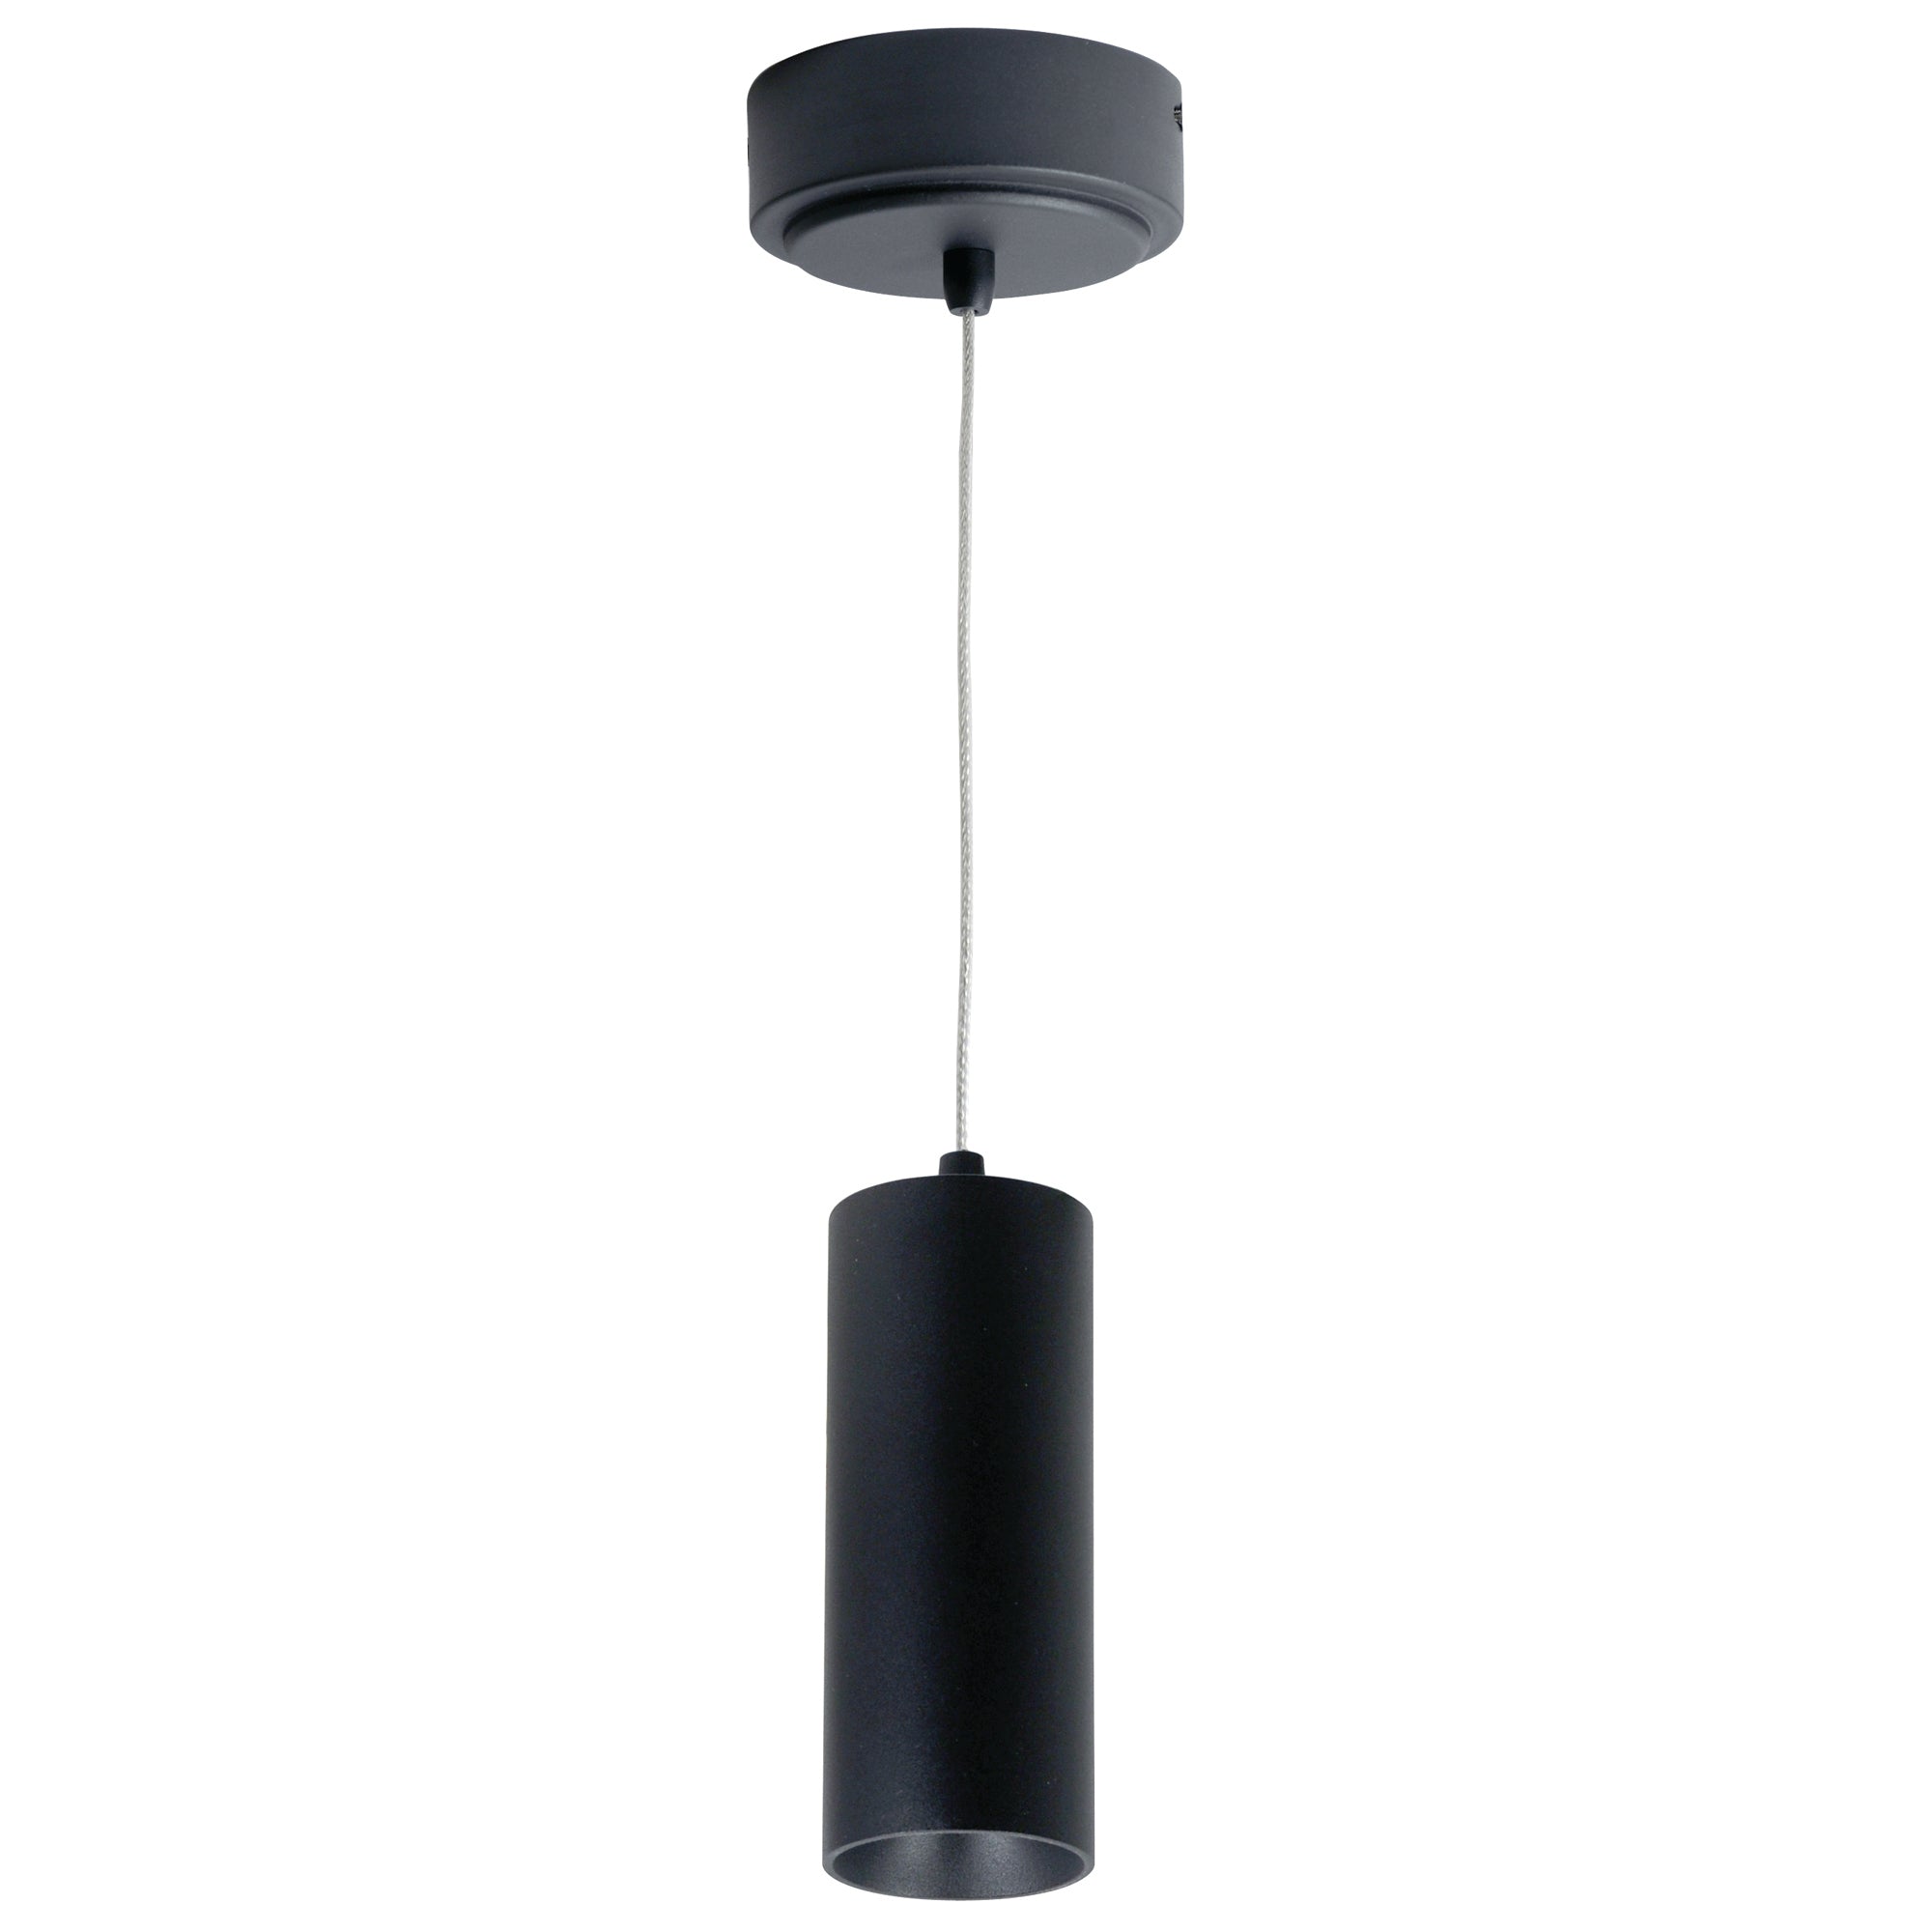 Nora Lighting LE56 - NYLM-2C27XBBLE3A - Cylinder - Black